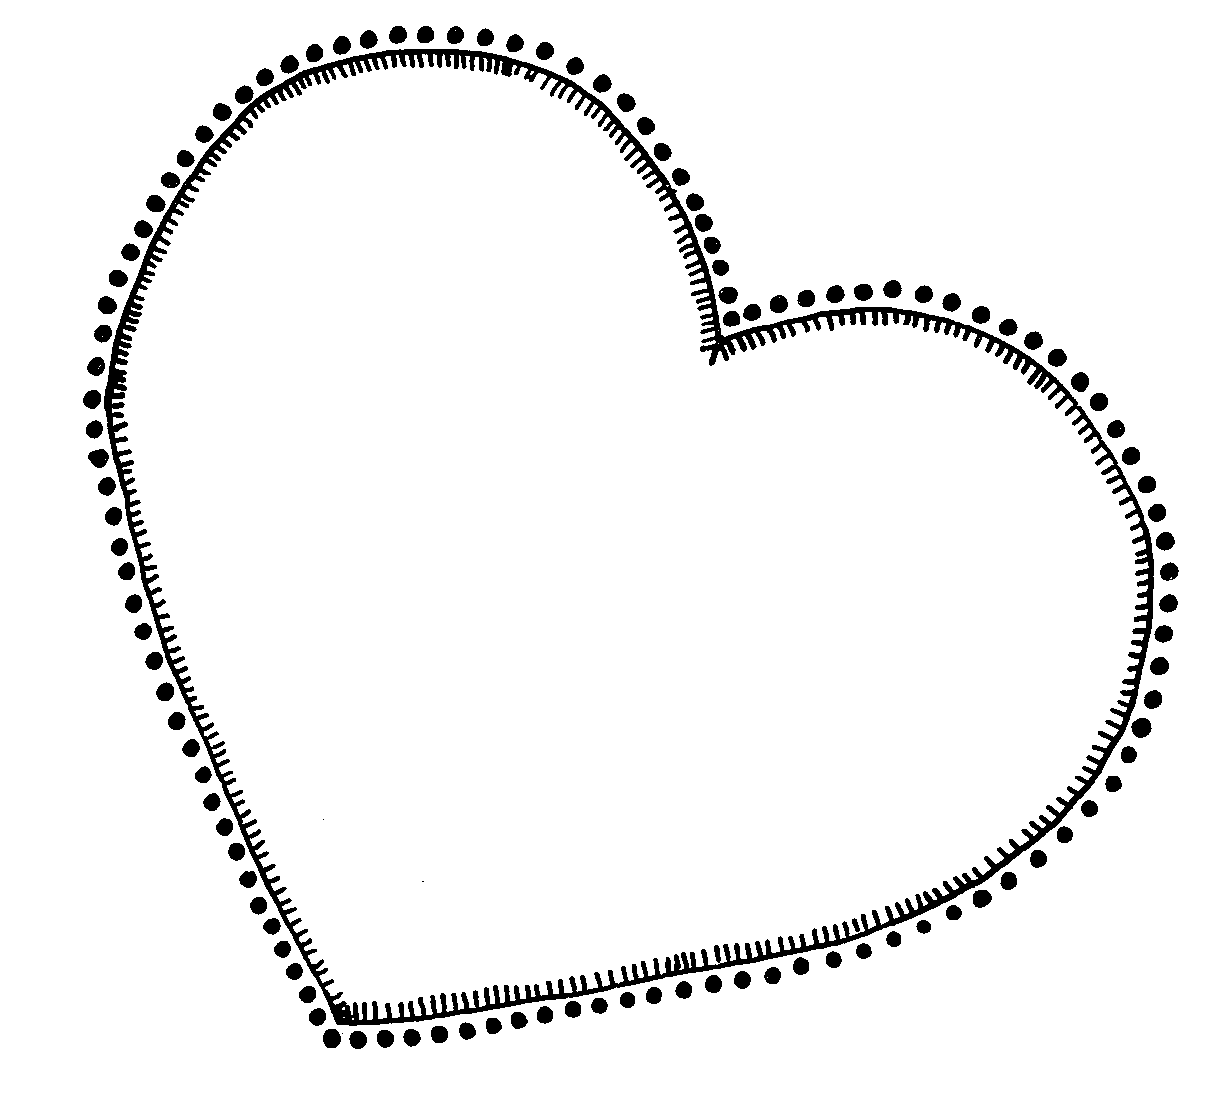 17 Heart Line Drawings Free Cliparts That You Can Download To You